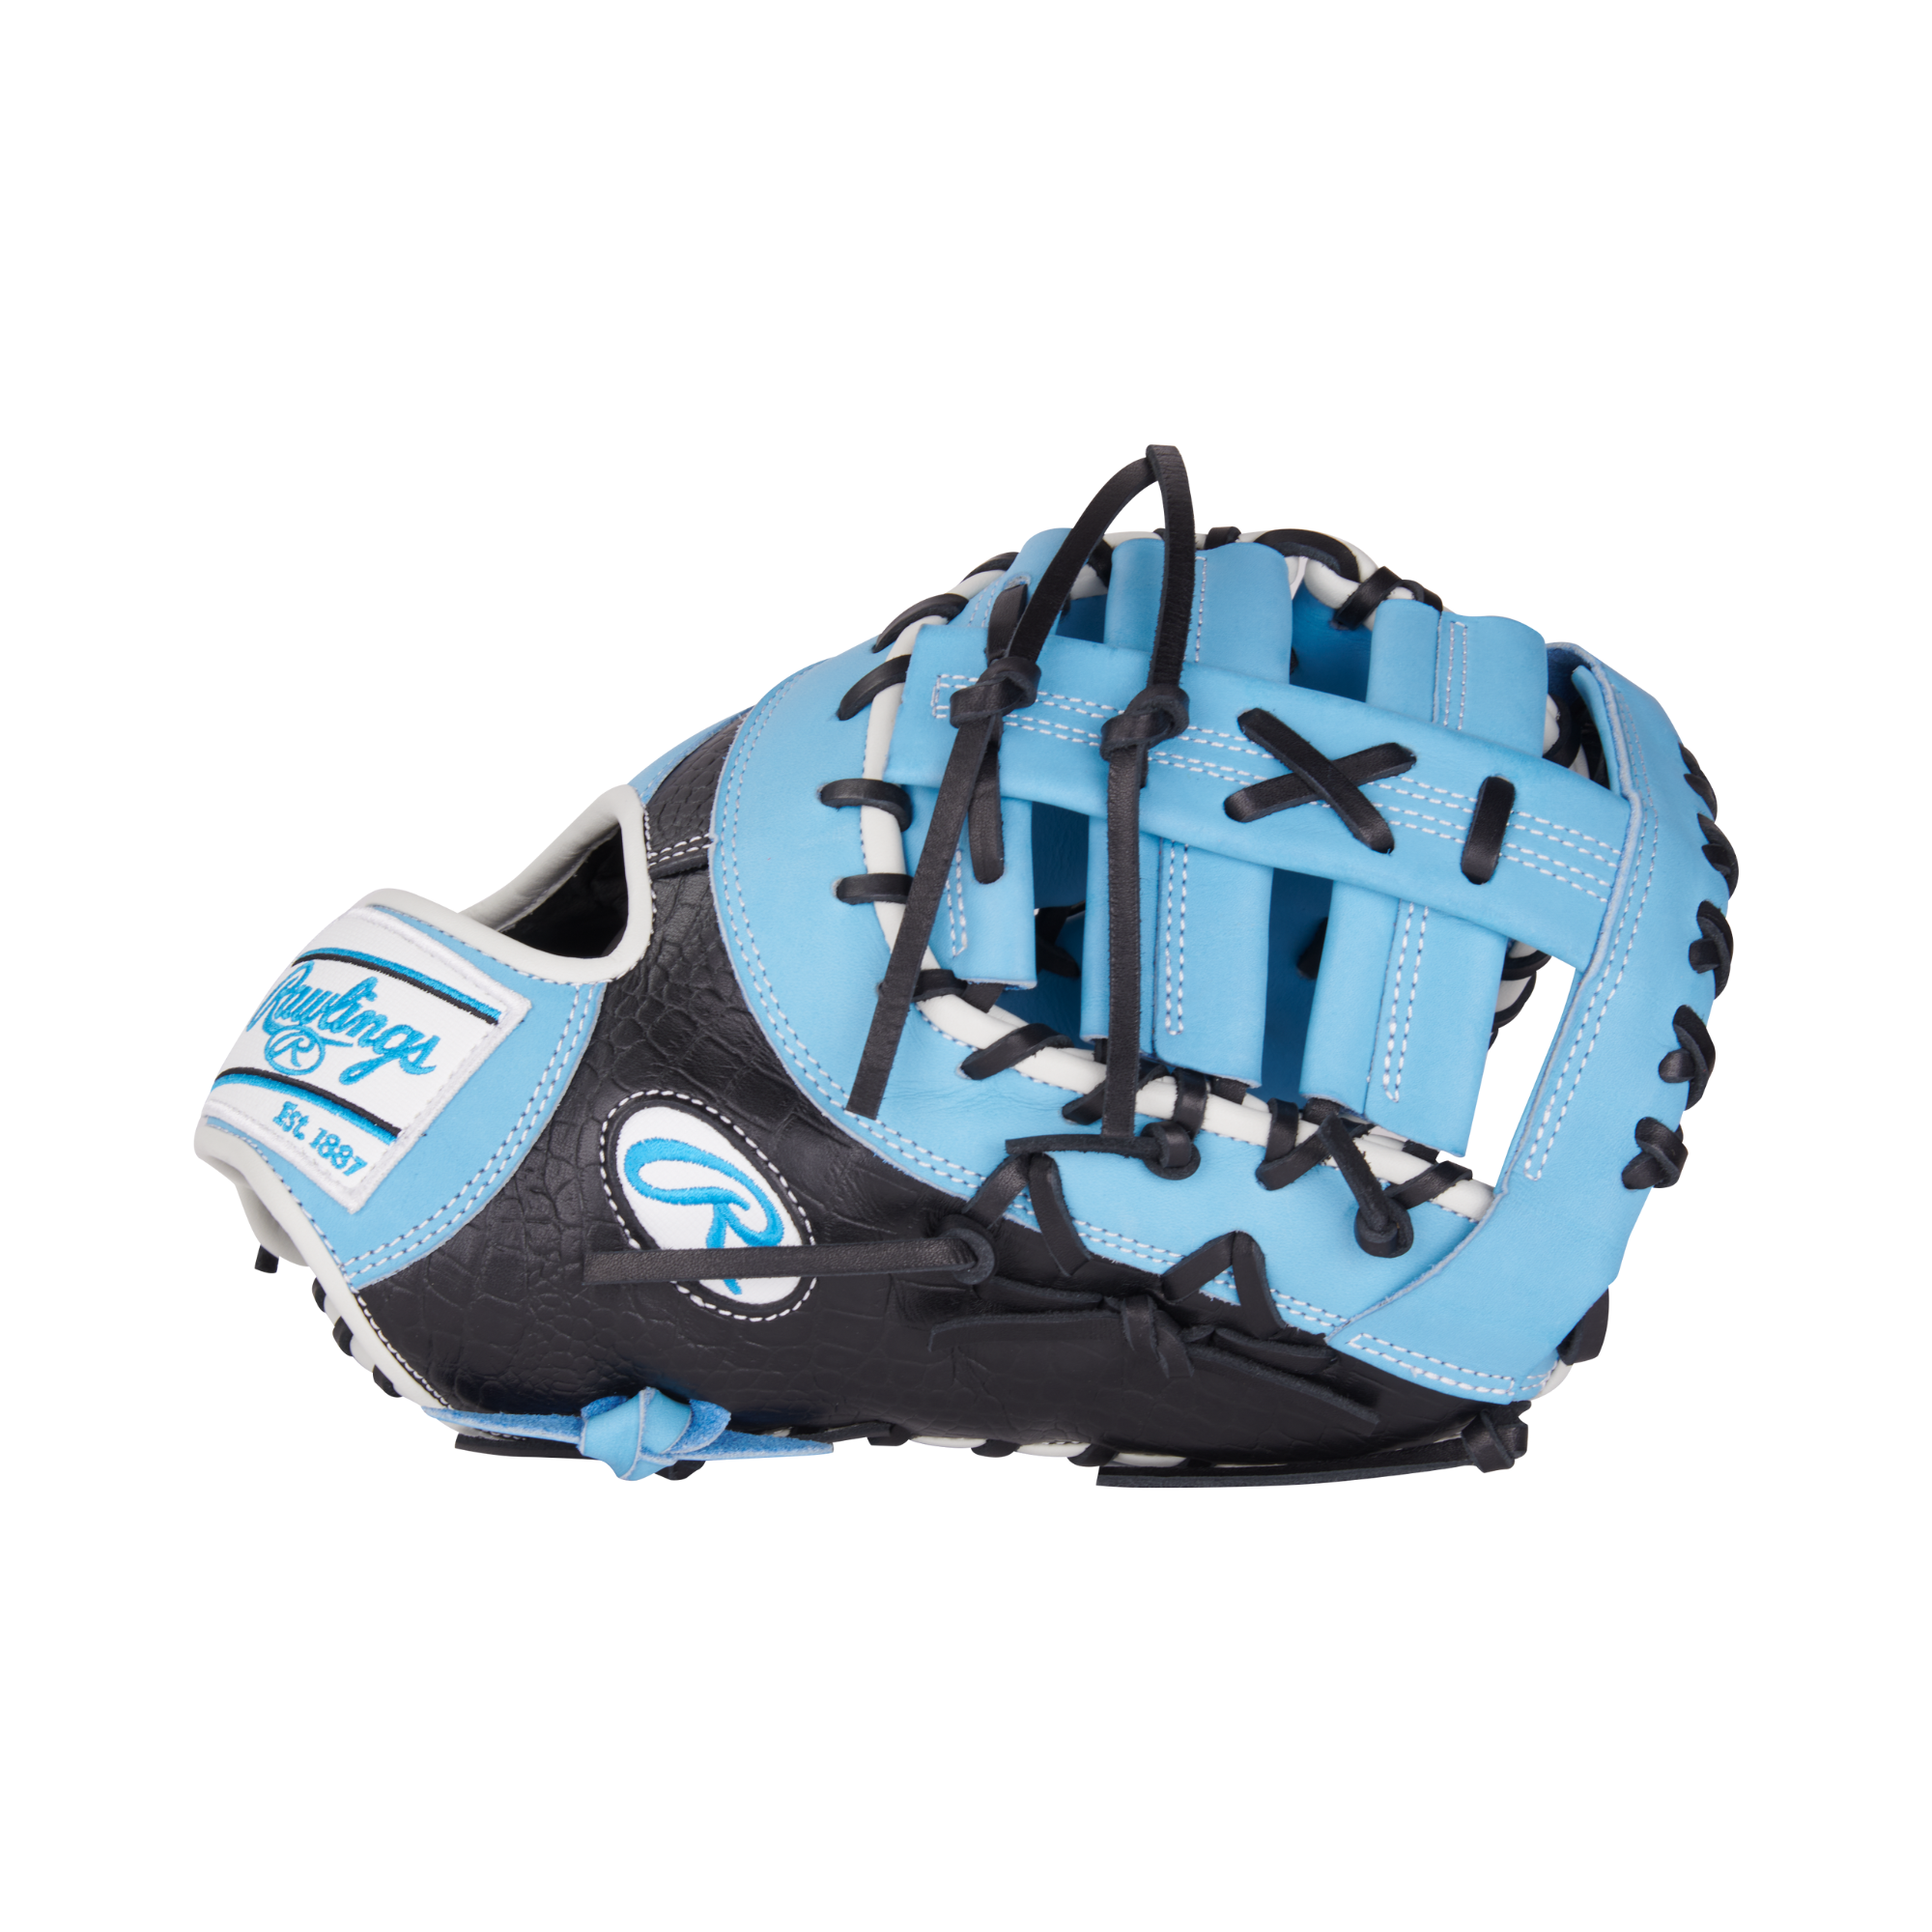 Rawlings Heart Of The Hide Series First Base Mitt 12.5" Col. Blue/Black LHT